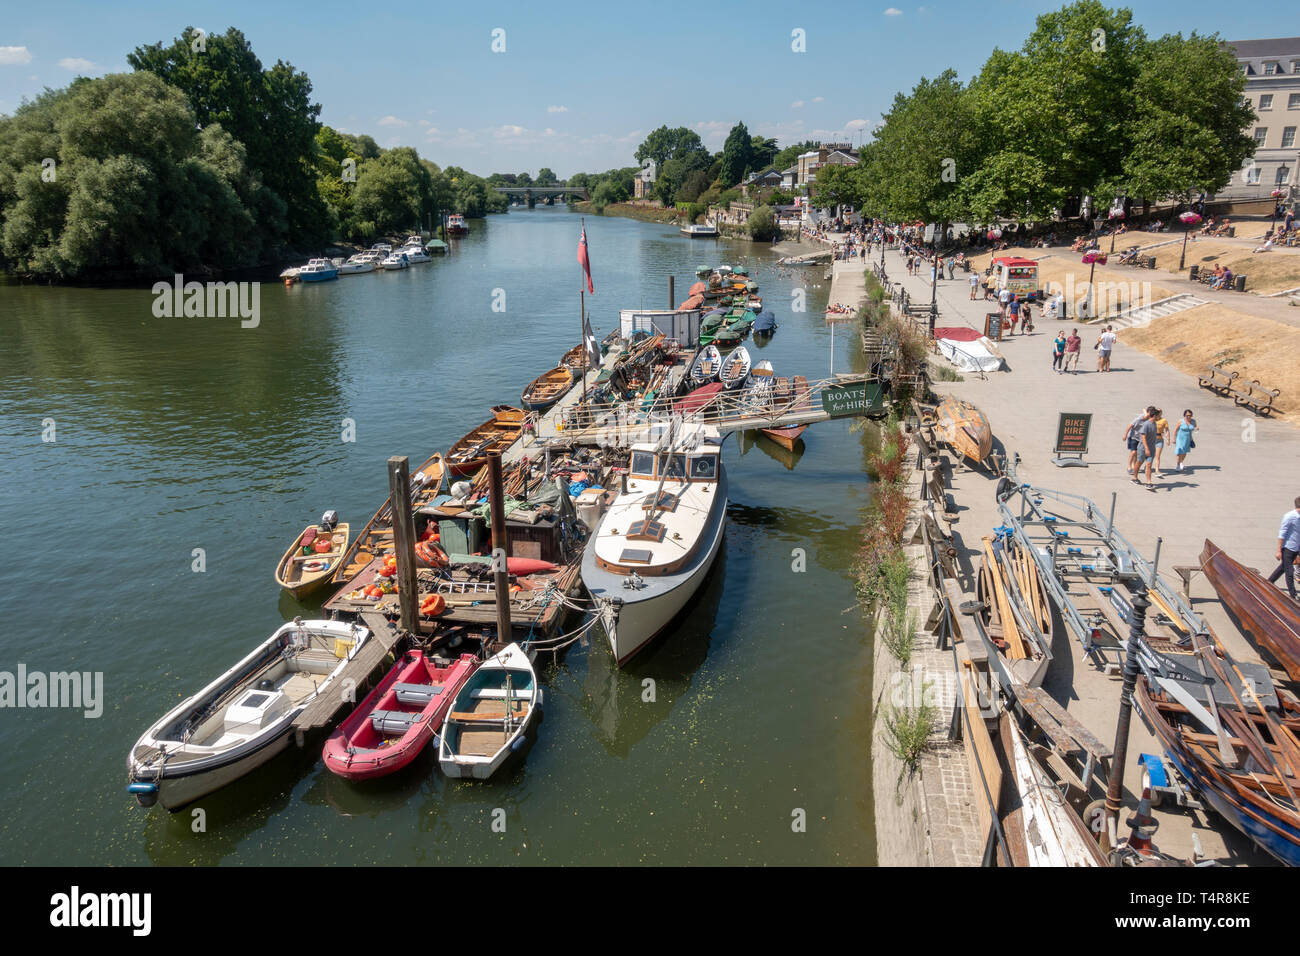 Boats moored on the River Thames close to Richmond Bridge, London, UK Stock Photo